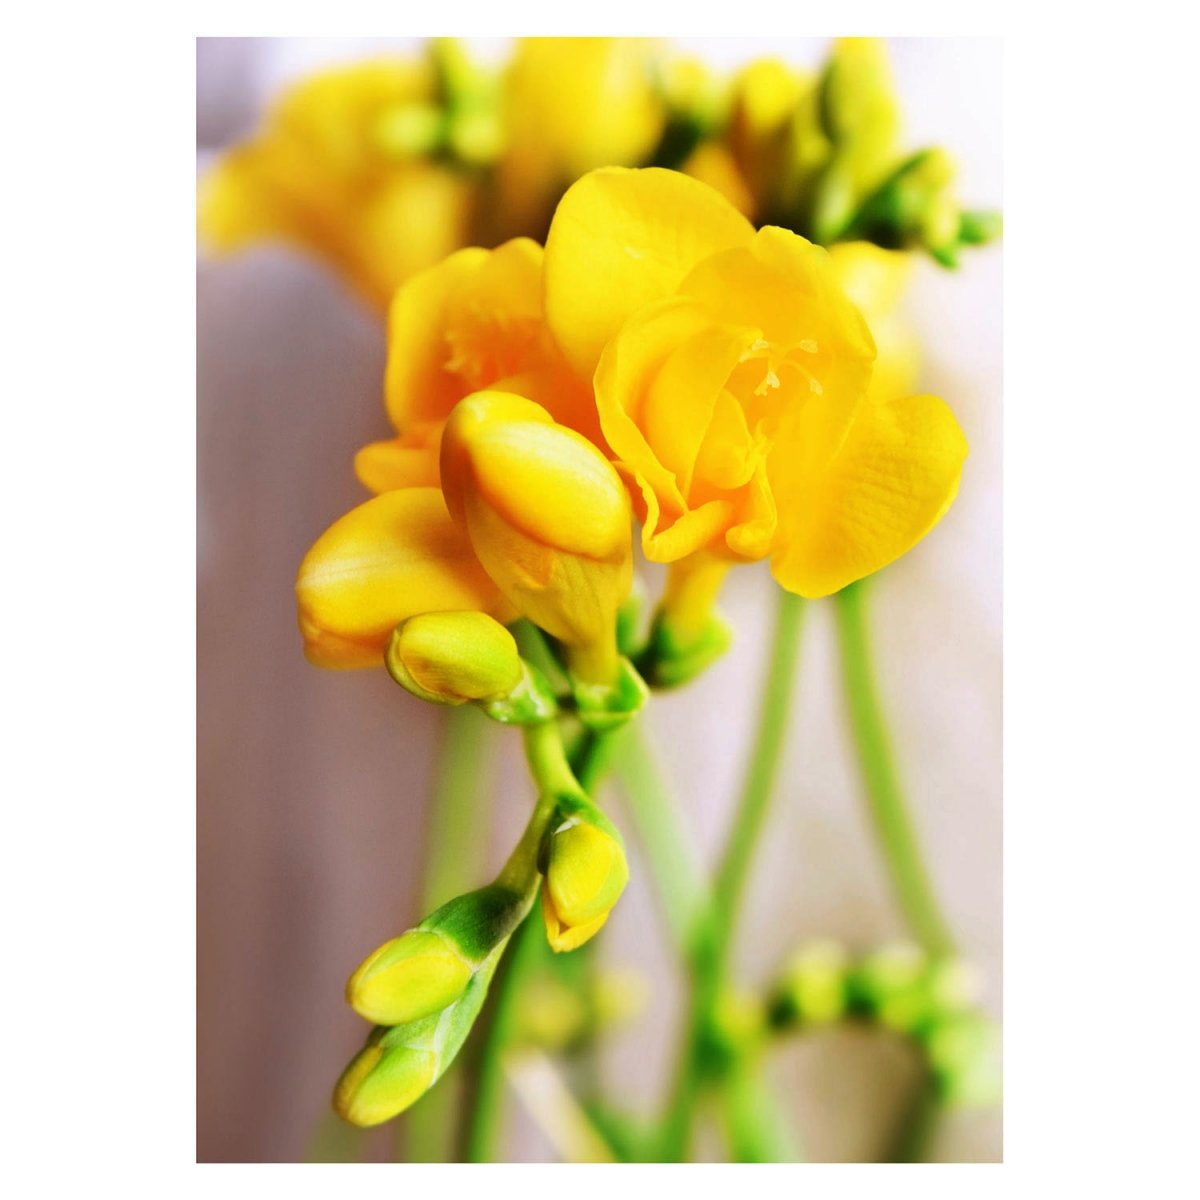 The lovely scented freesias